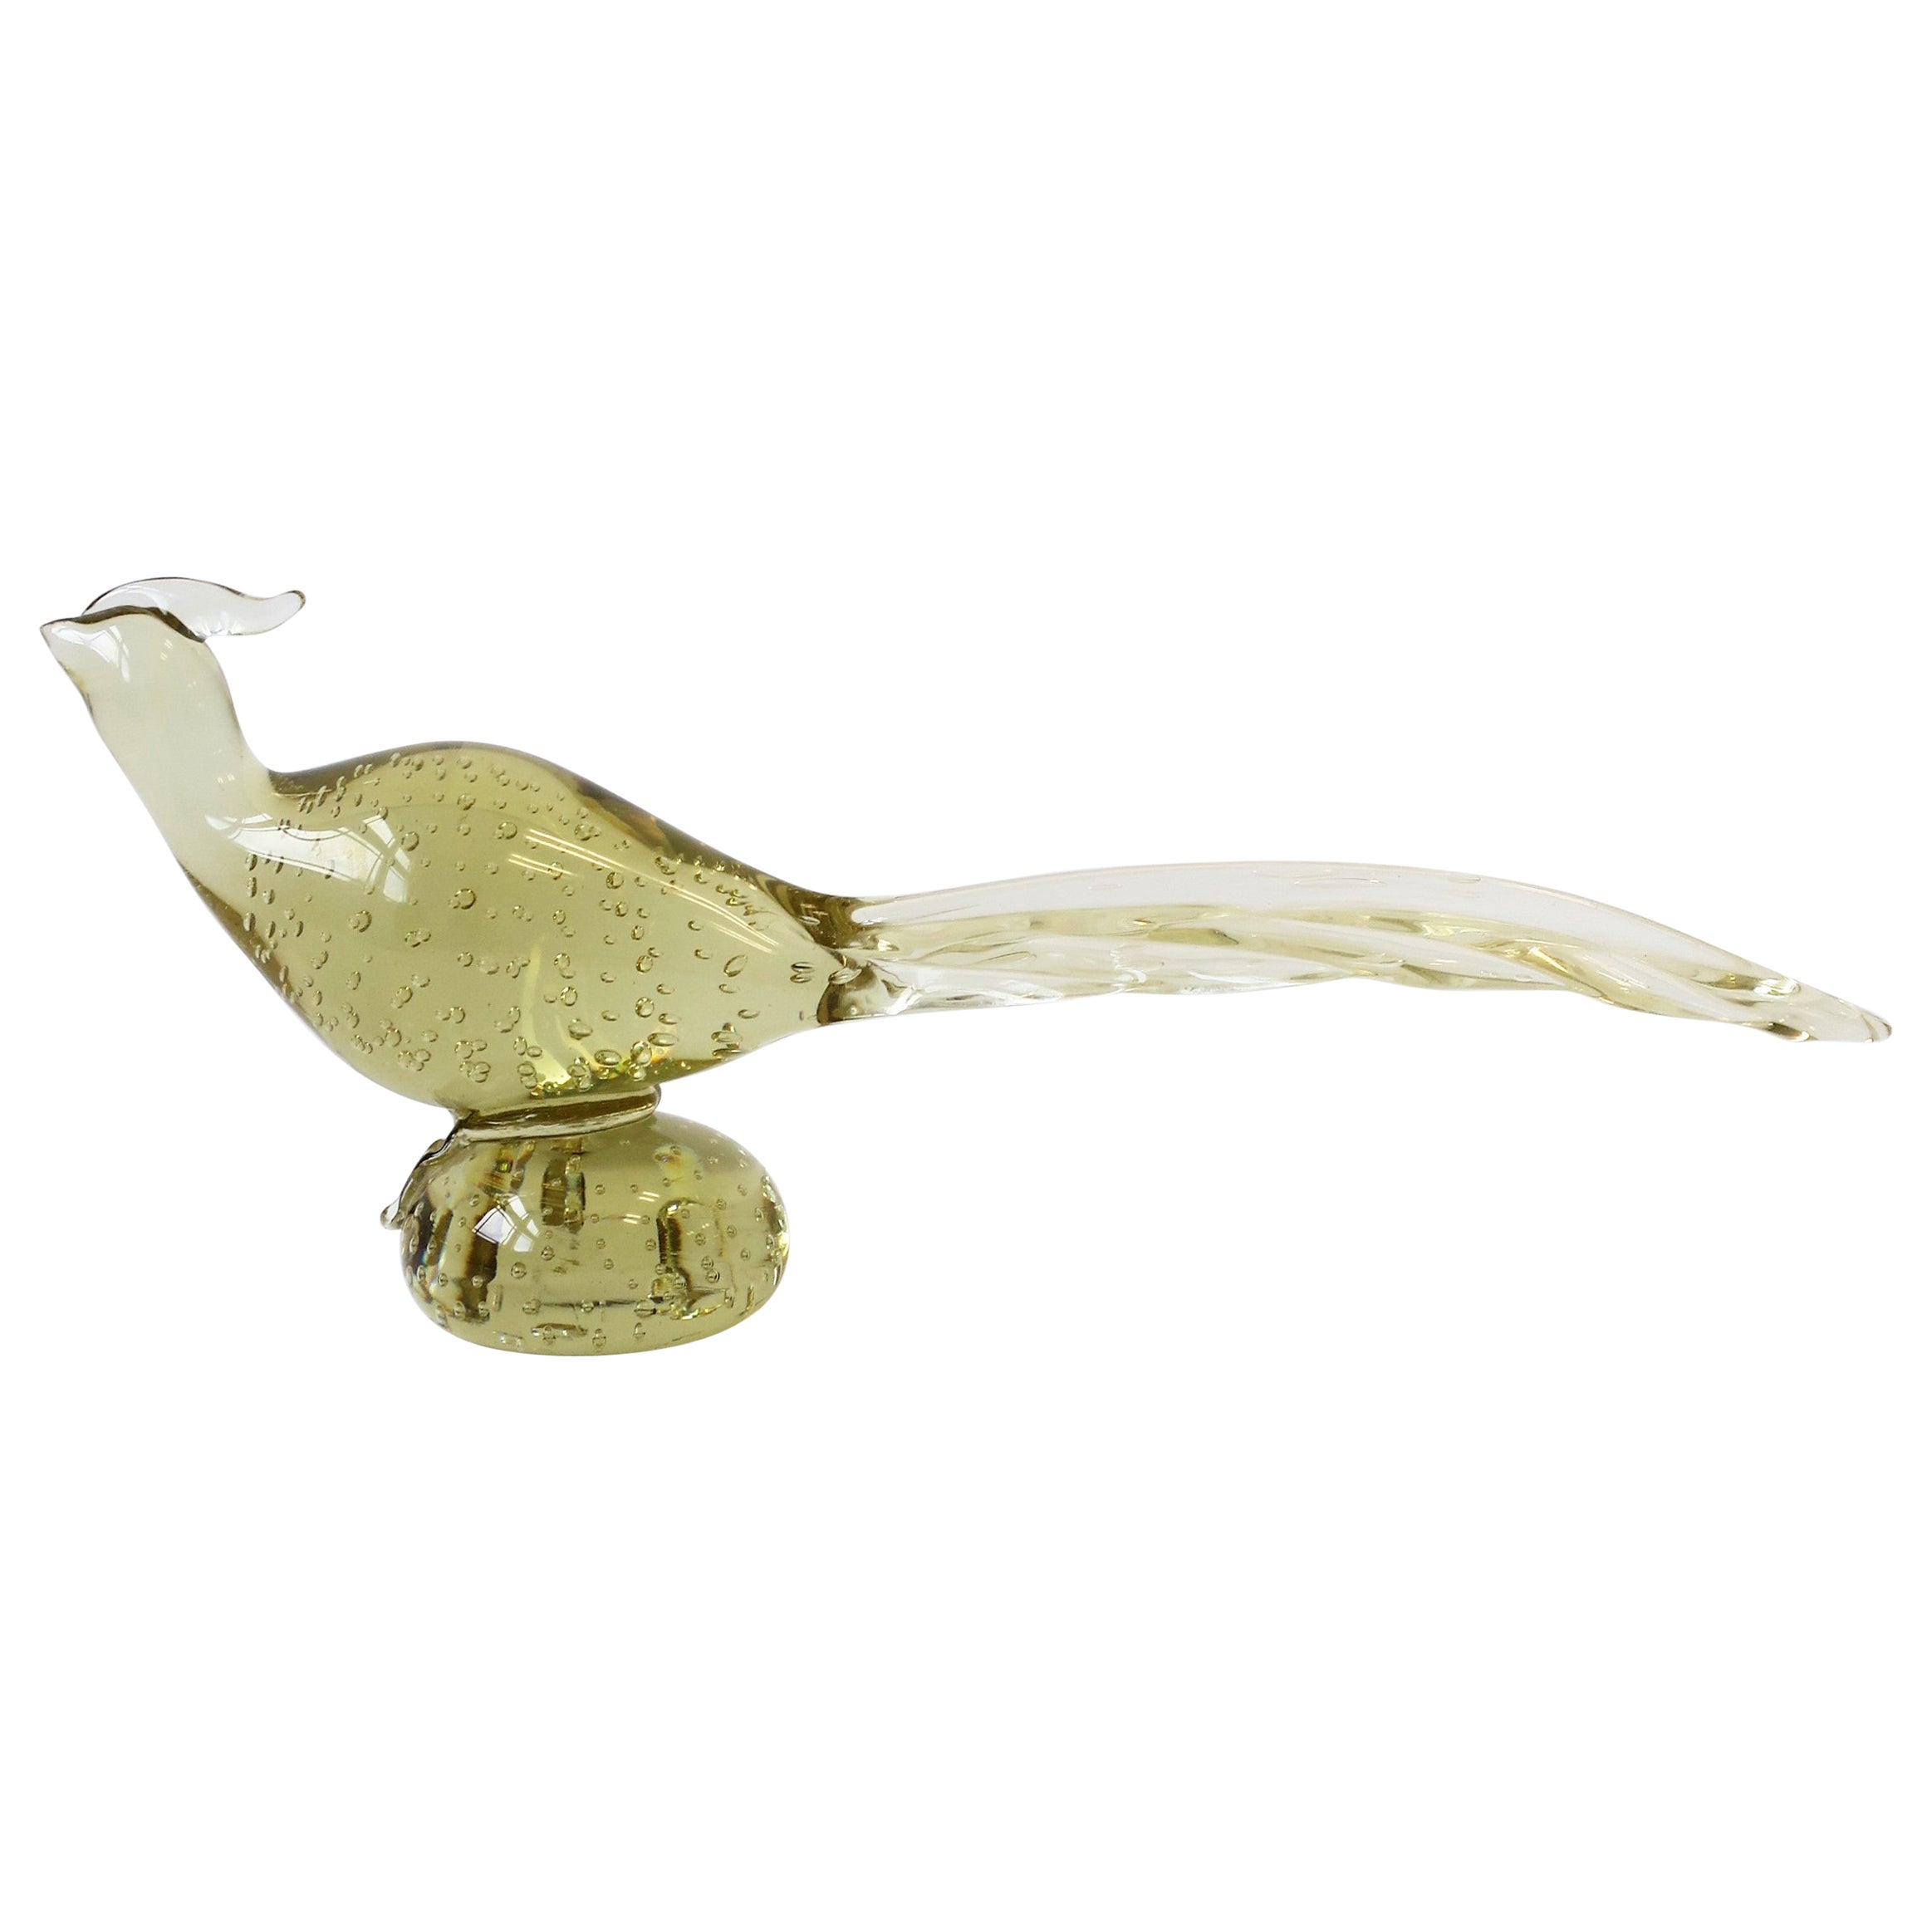 How can you tell if a bird is Murano glass?